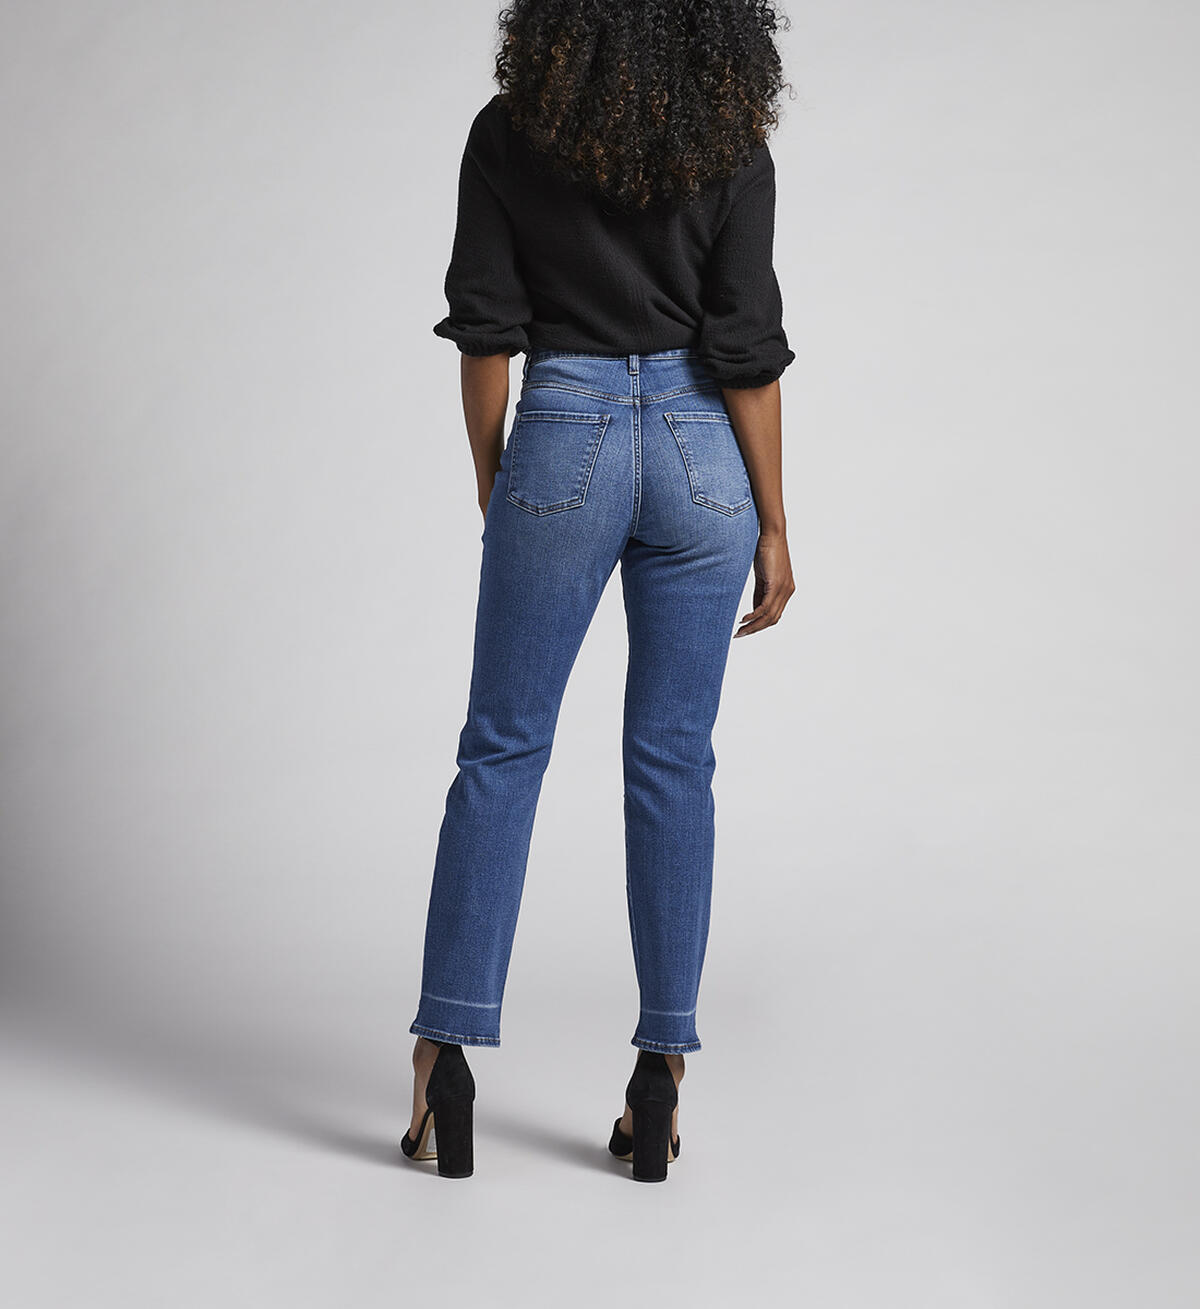 Stella 30-Inch High Rise Straight Leg Jeans, , hi-res image number 1